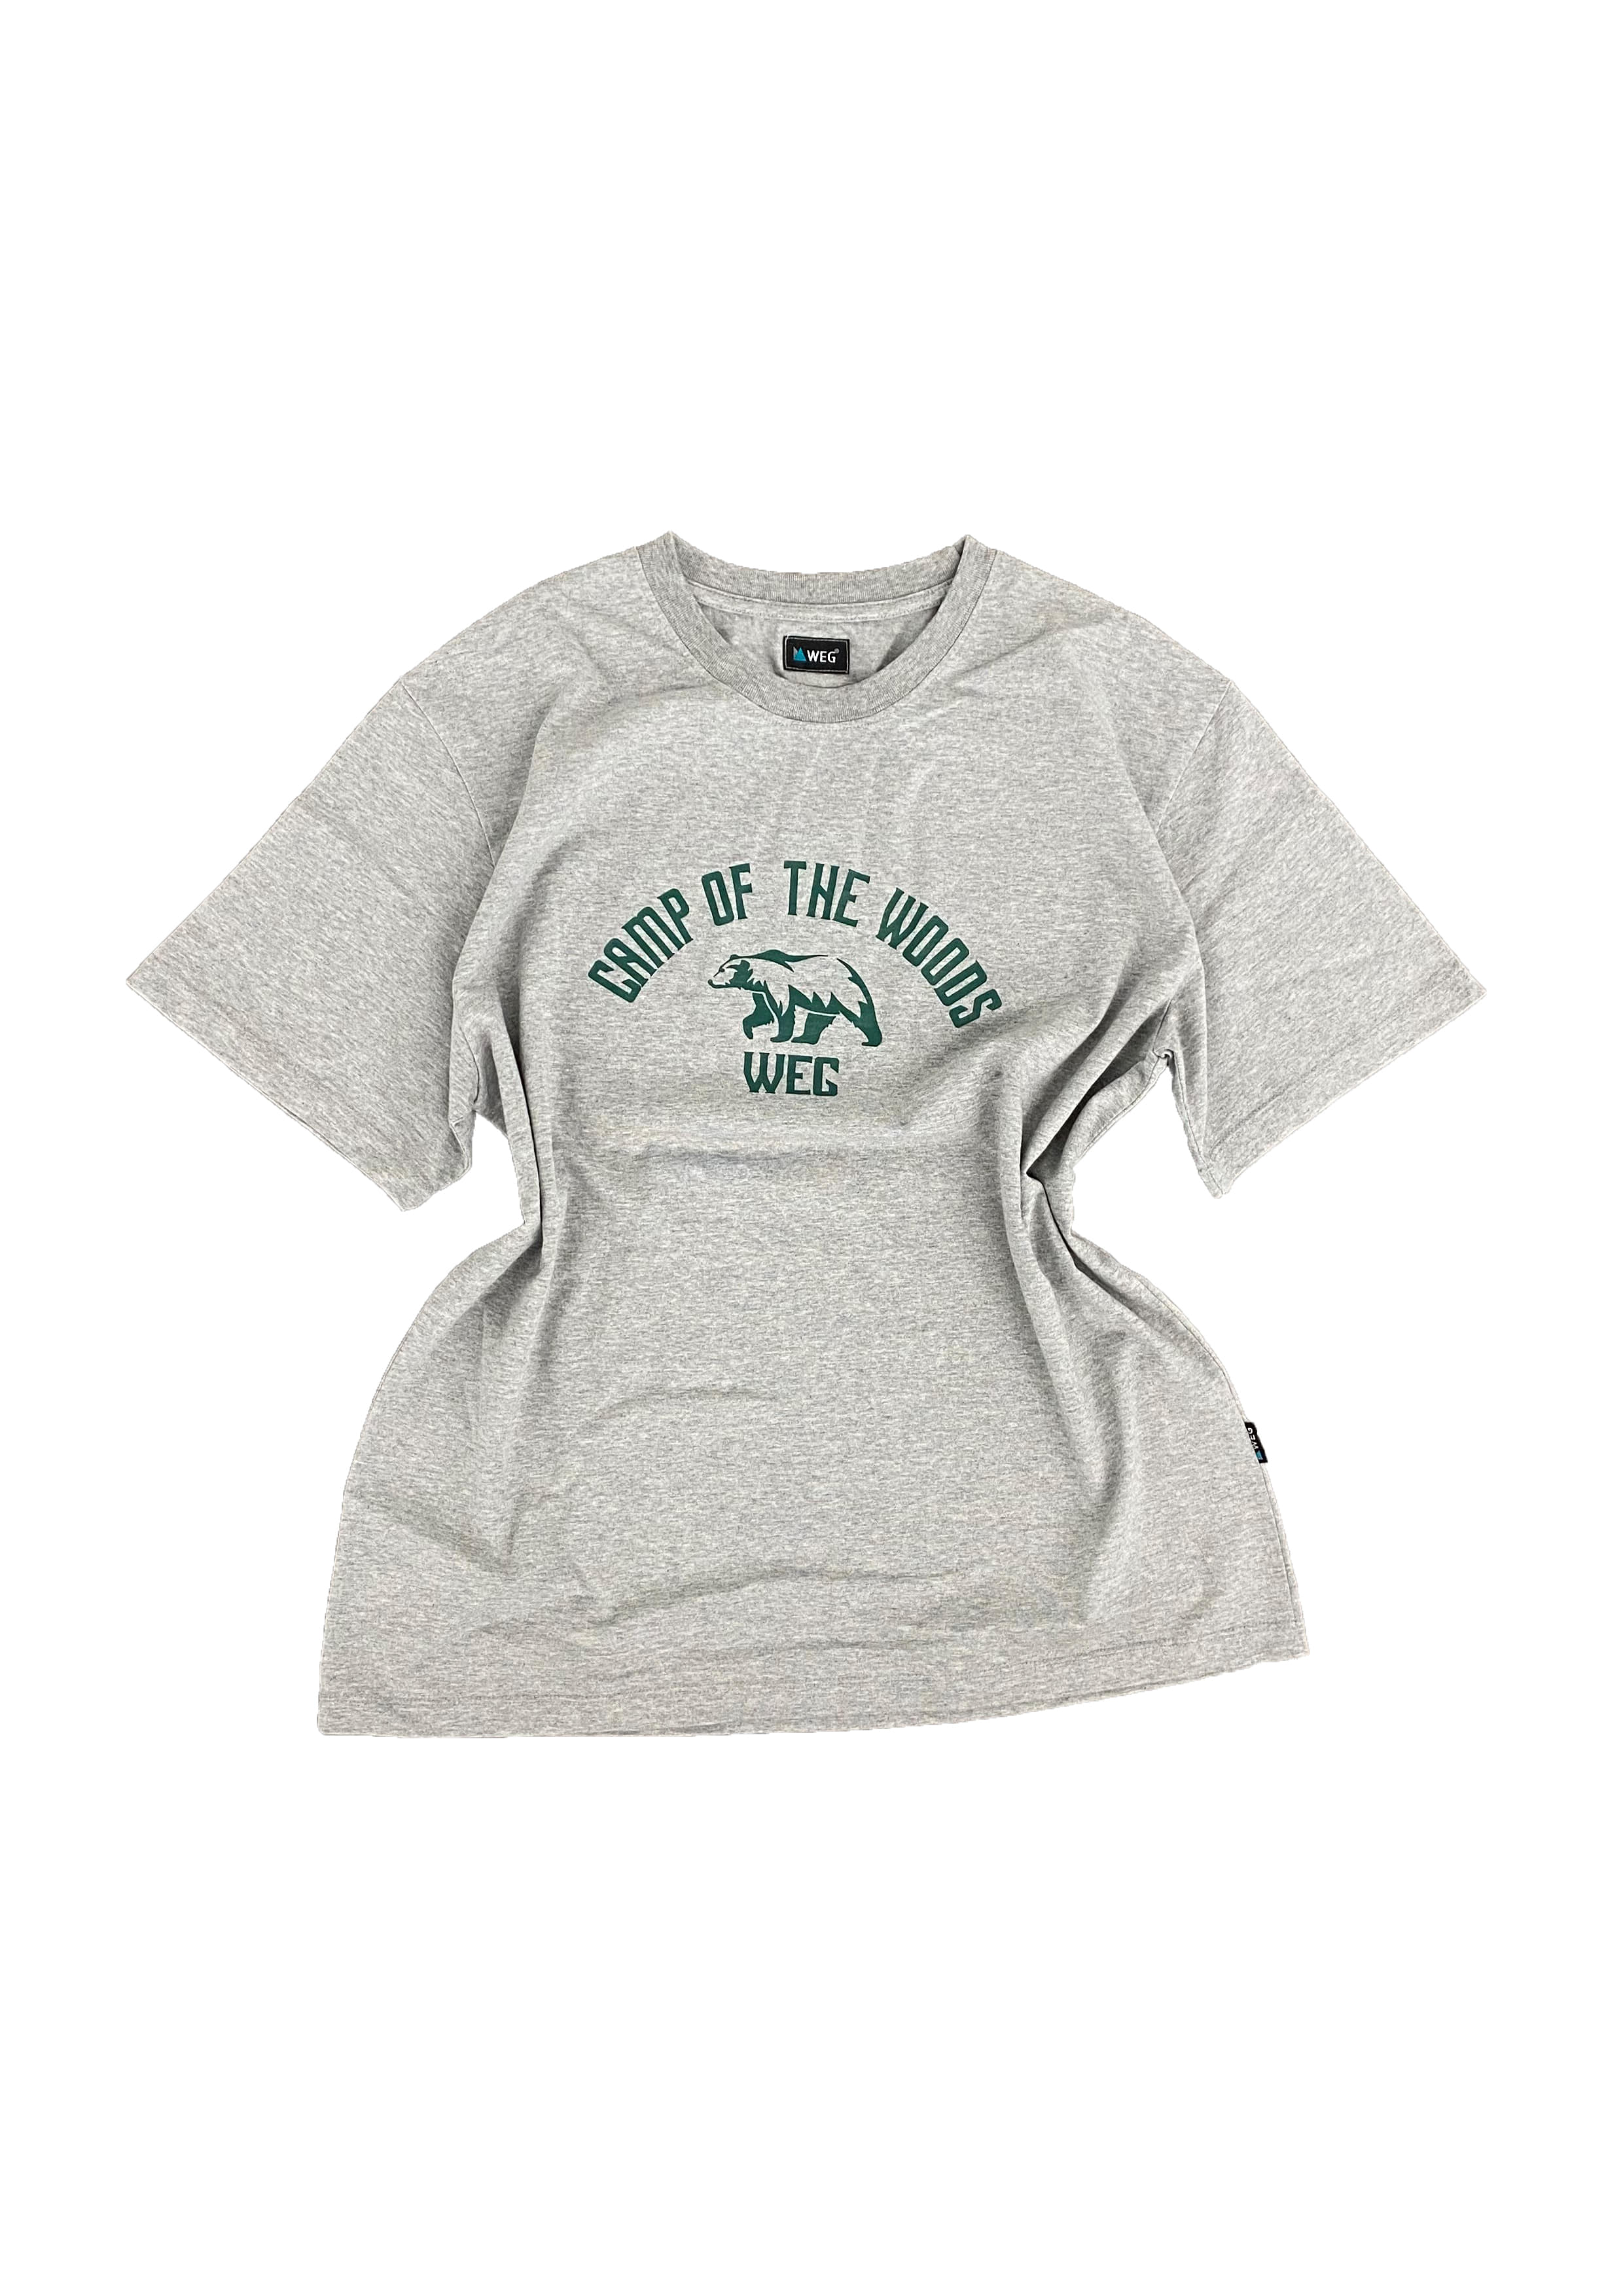 Camp Of The Woods T-Shirt (Grey)